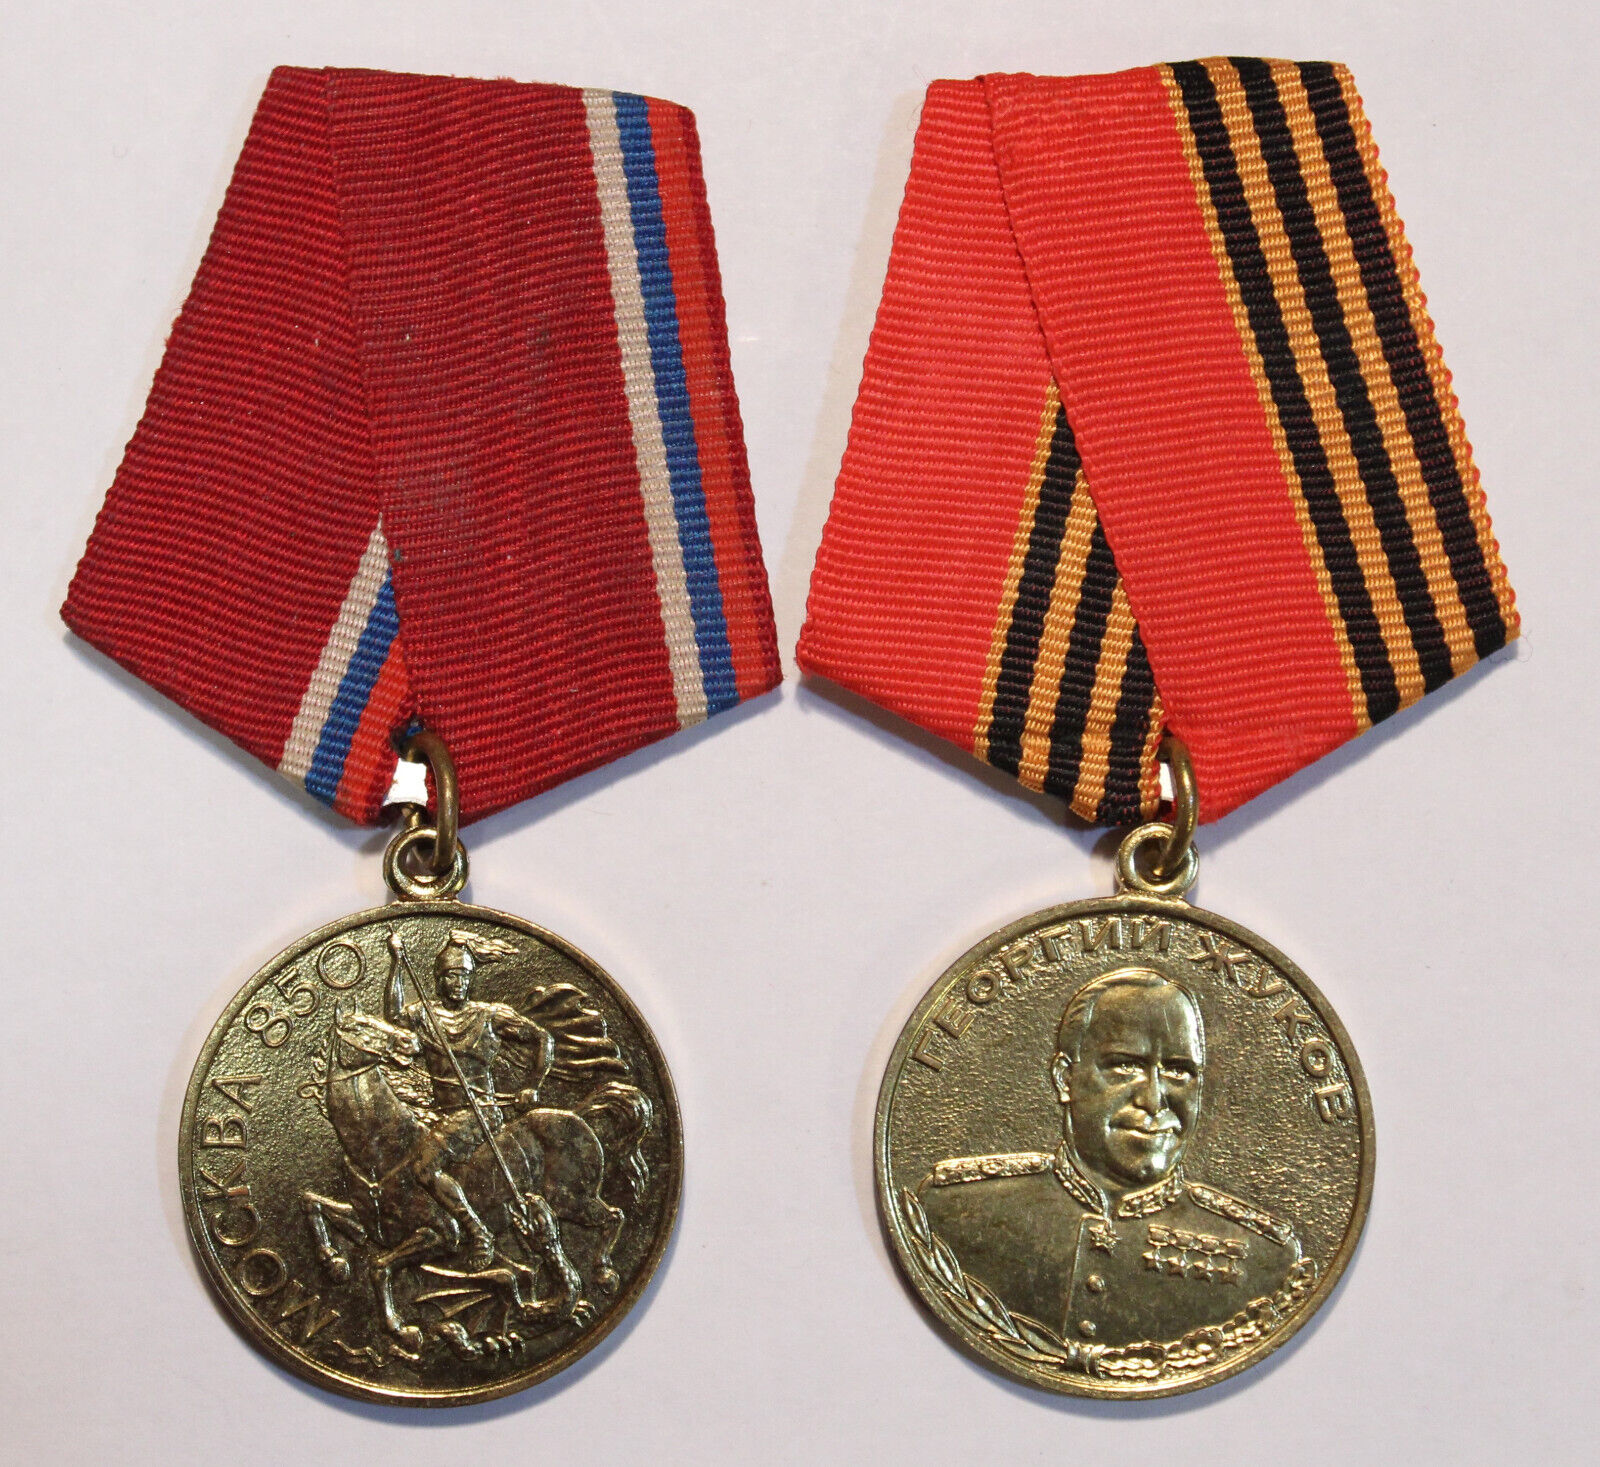 2 Current Russian medals - 850th Anniversary Moscow & Zhukov merit medal